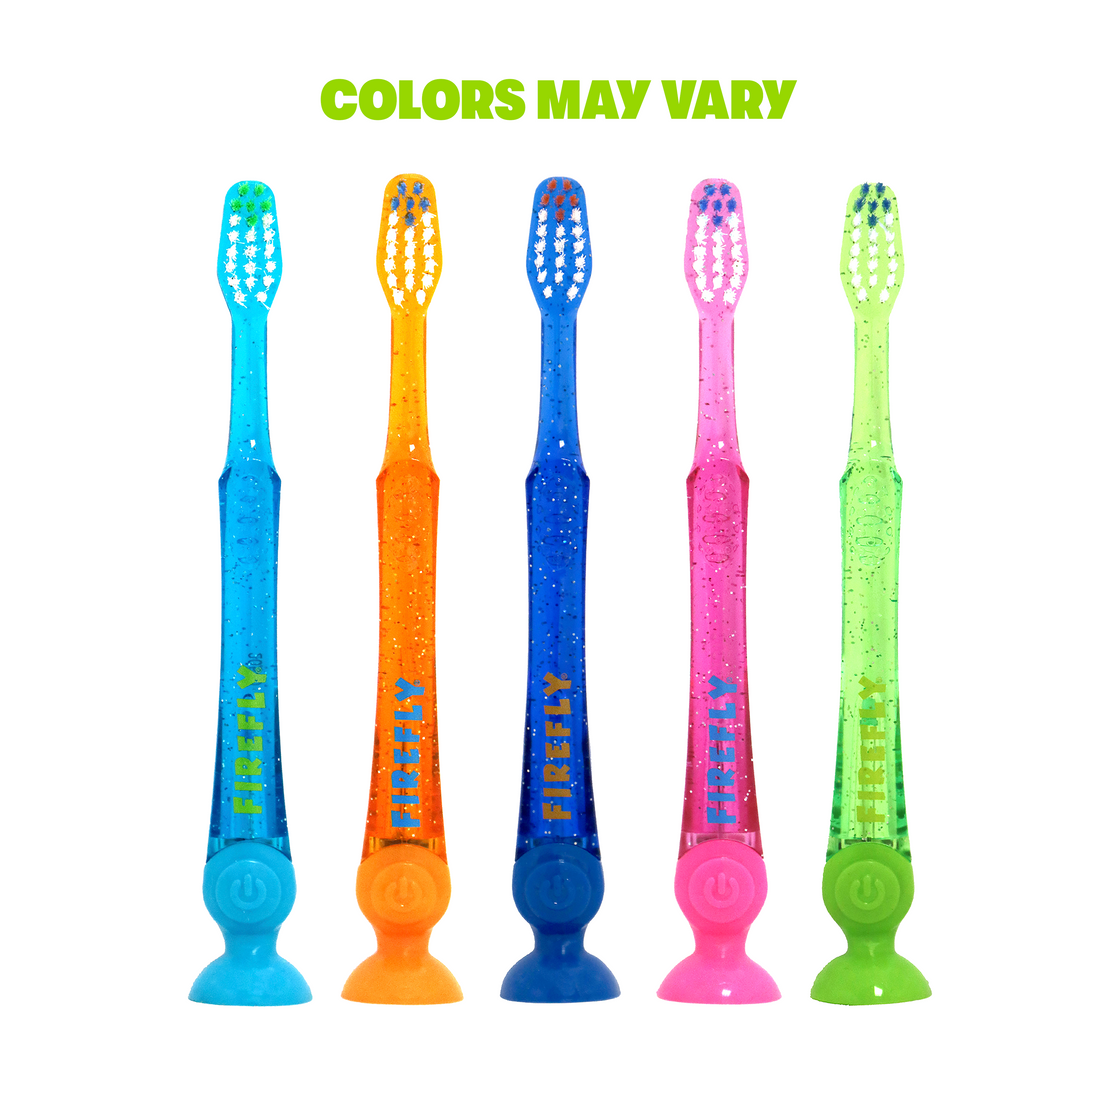 Light blue, orange, dark blue, pink, lime green colors of toothbrush, Colors may vary